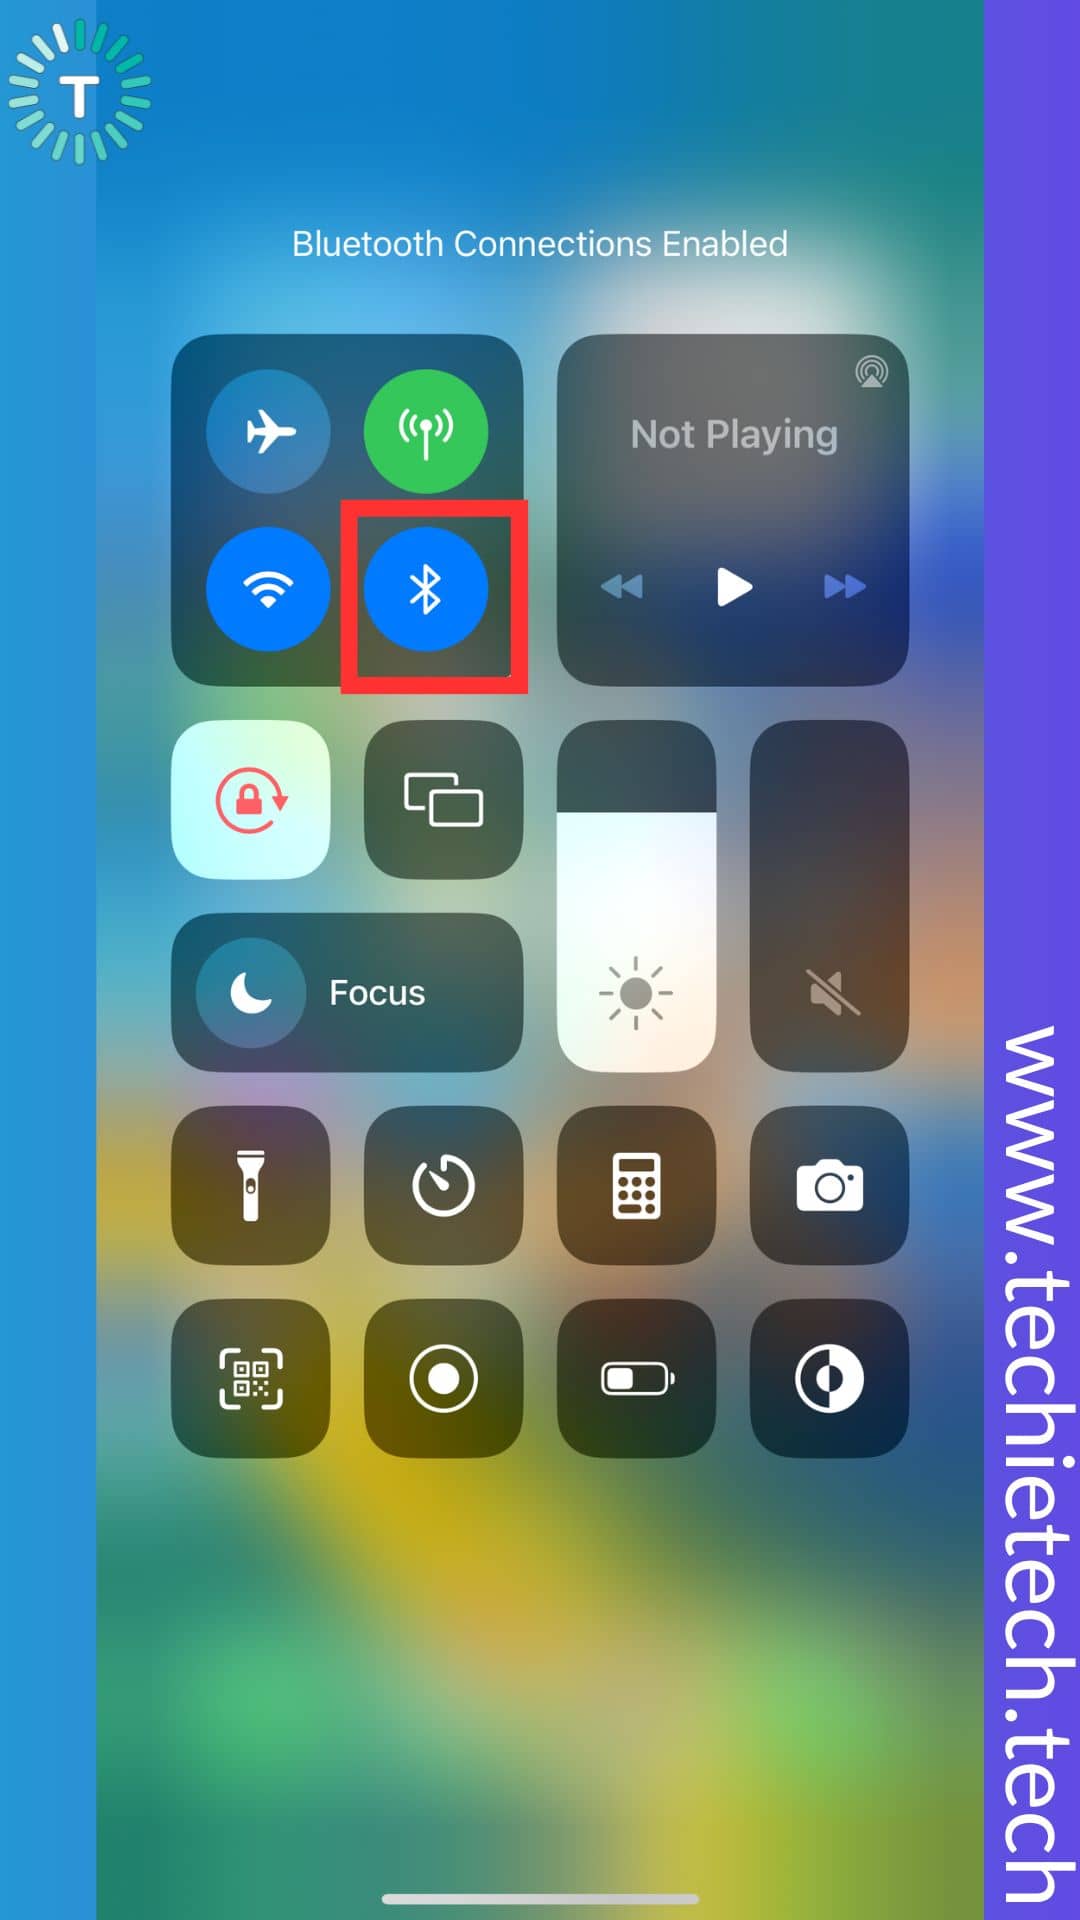 Tap Bluetooth icon to turn it on